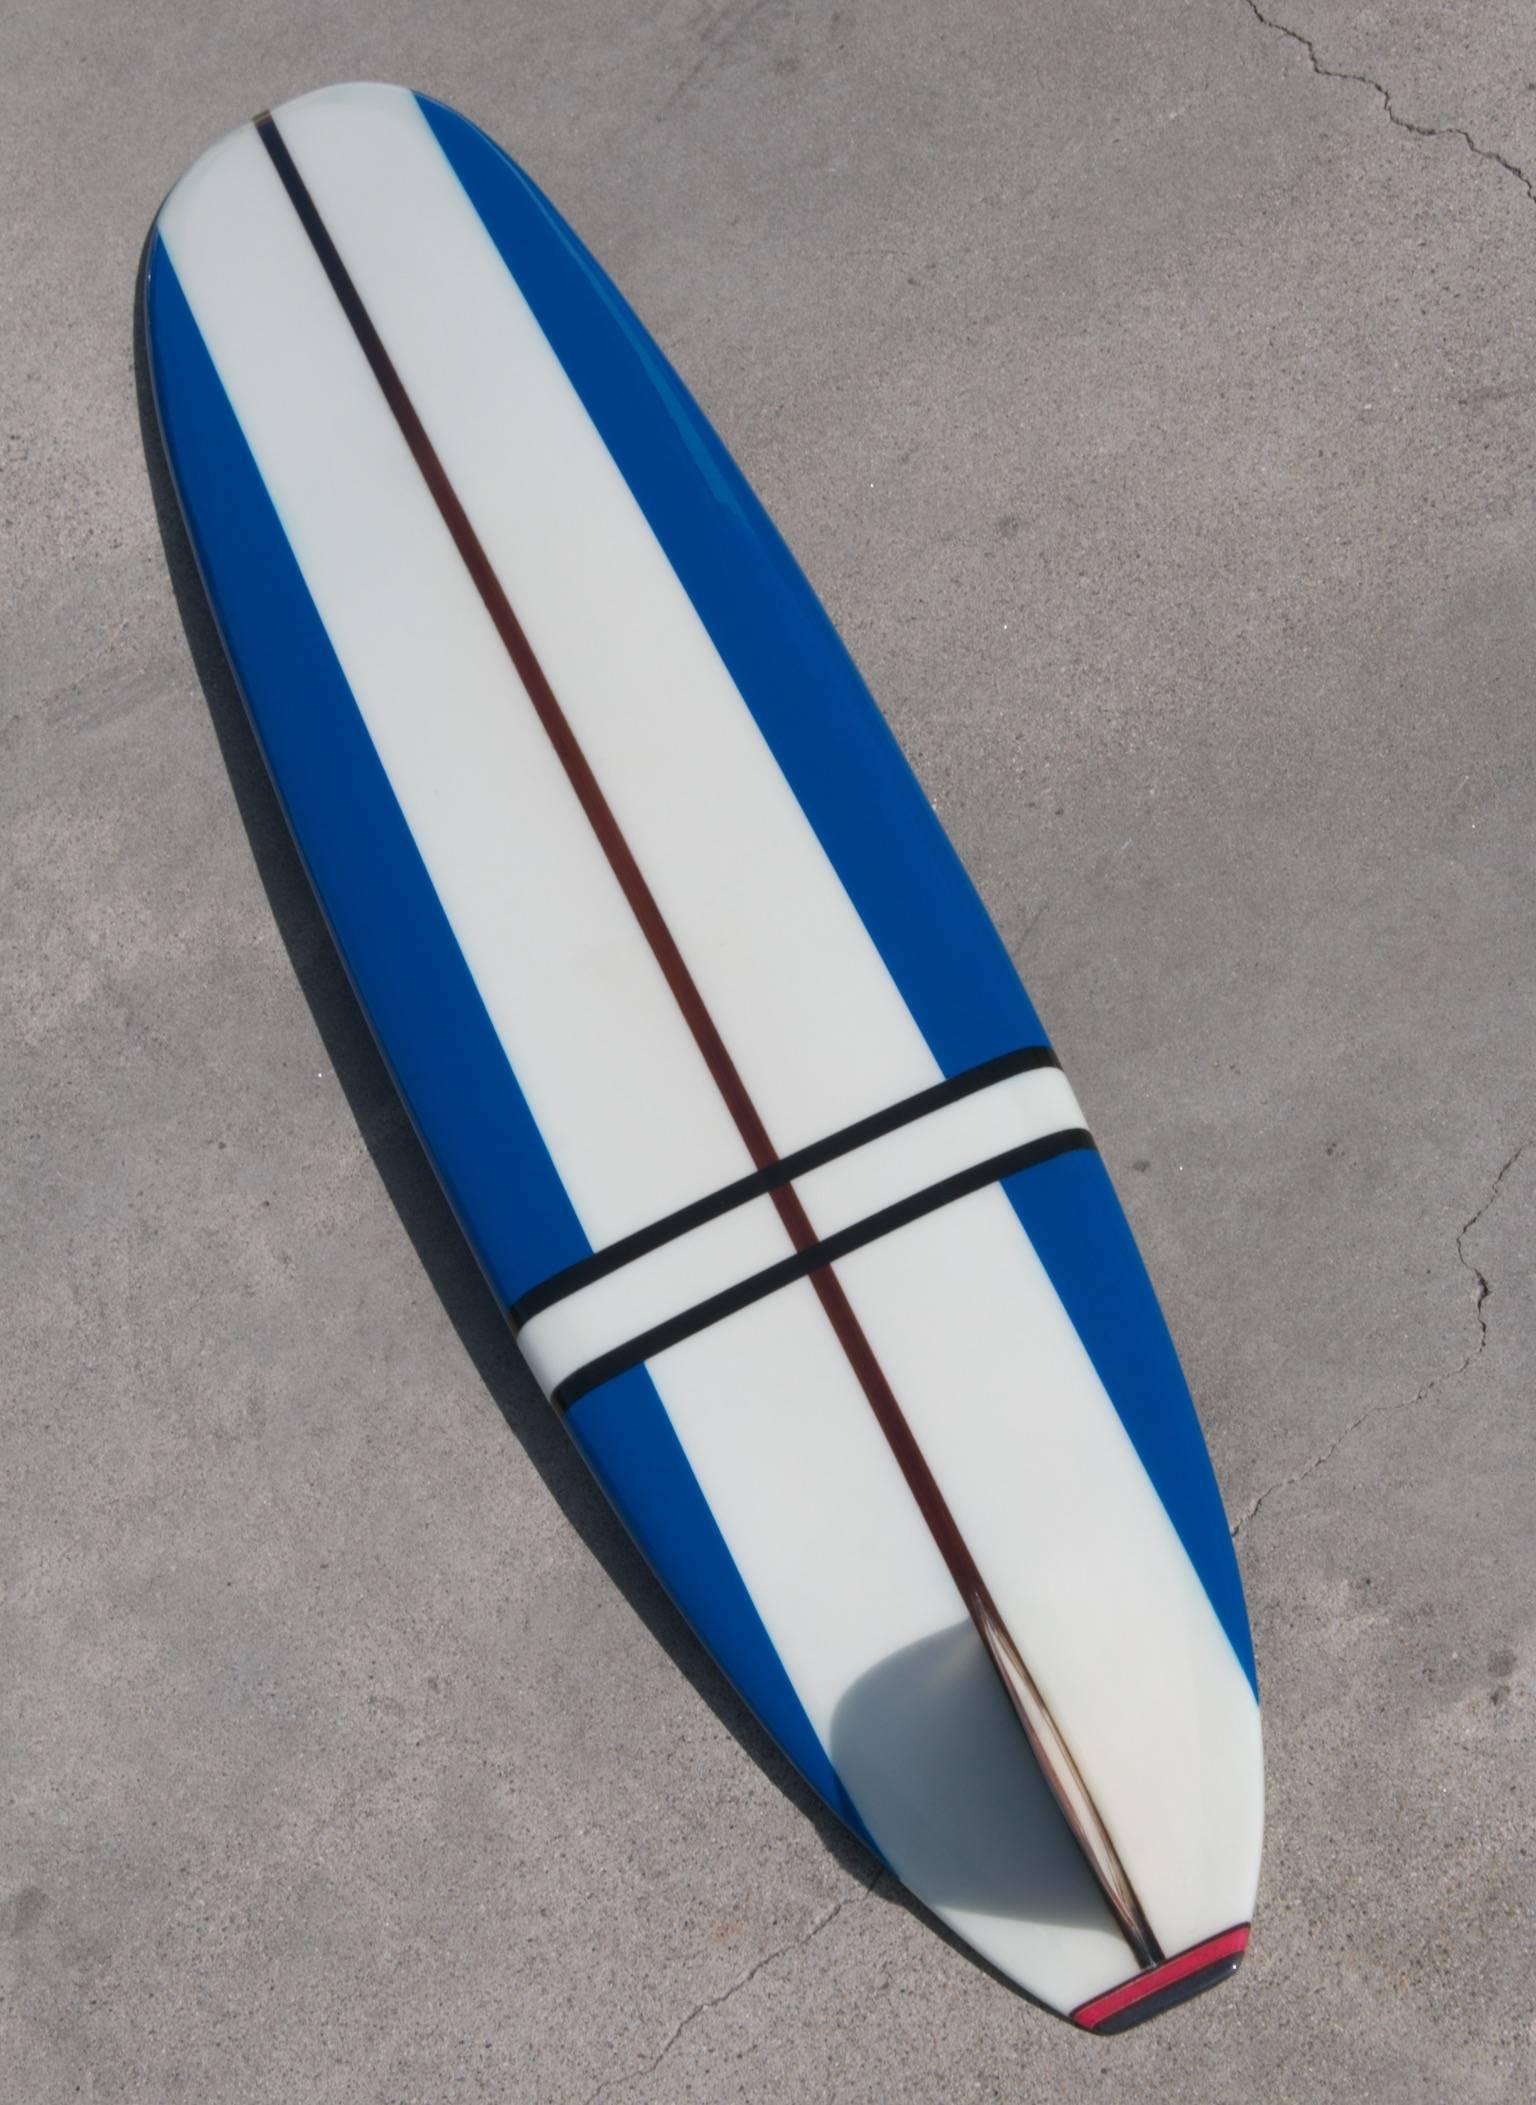 Mid-Century Modern Jacobs Surfboard Fully Restored, Blue, White and Red, Early 1960s For Sale